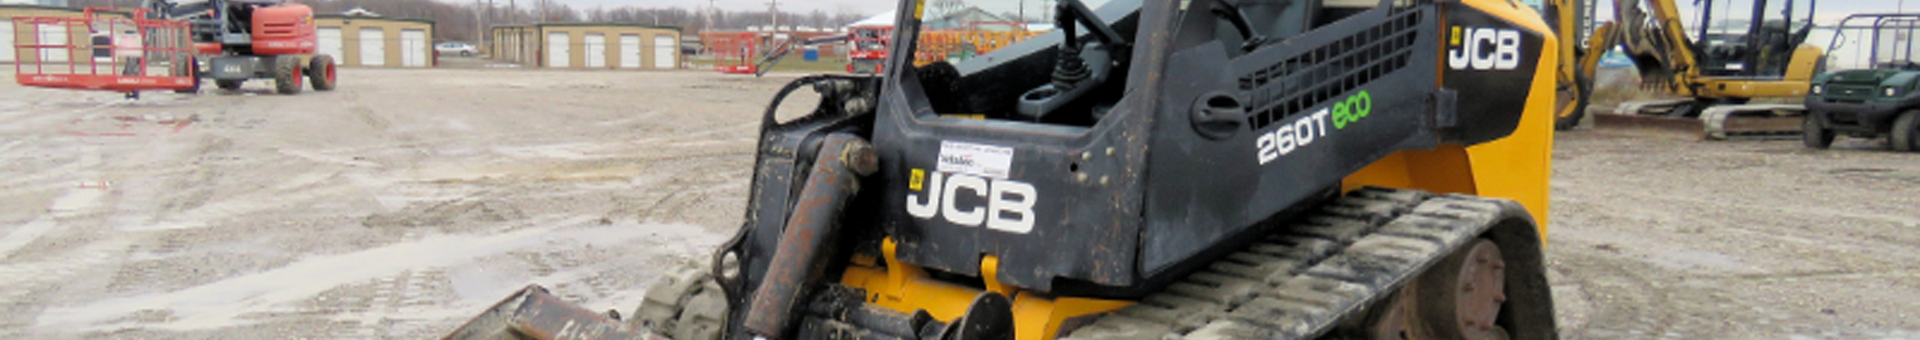 Used Jcb Equipment For Sale Online From Bidadoo Auctions